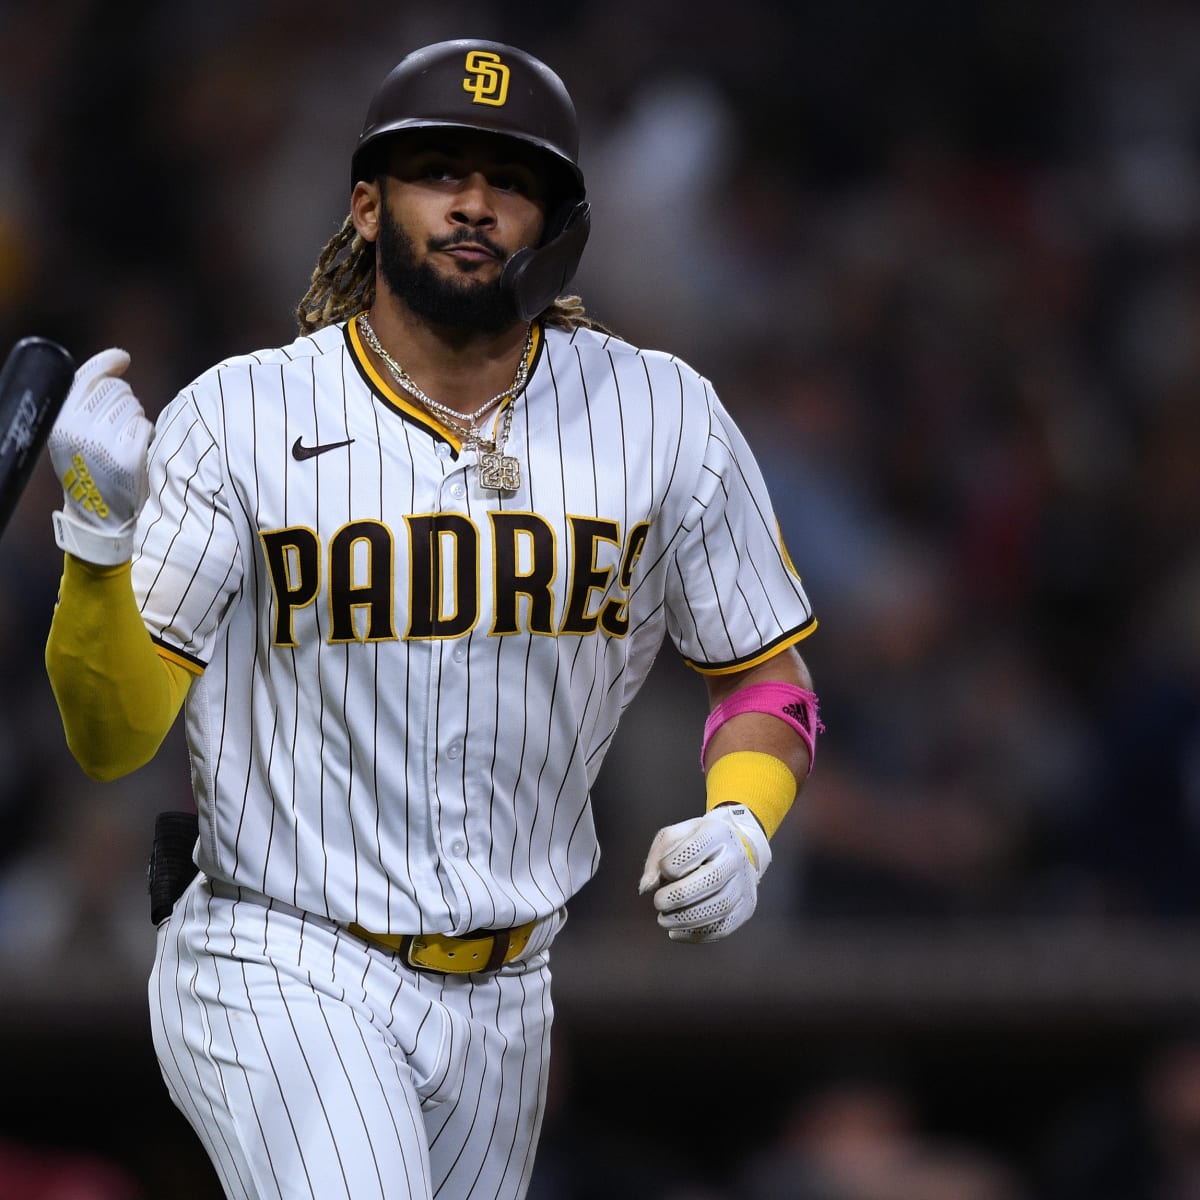 Padres' Tatis Jr. taking talents to All-Star Game